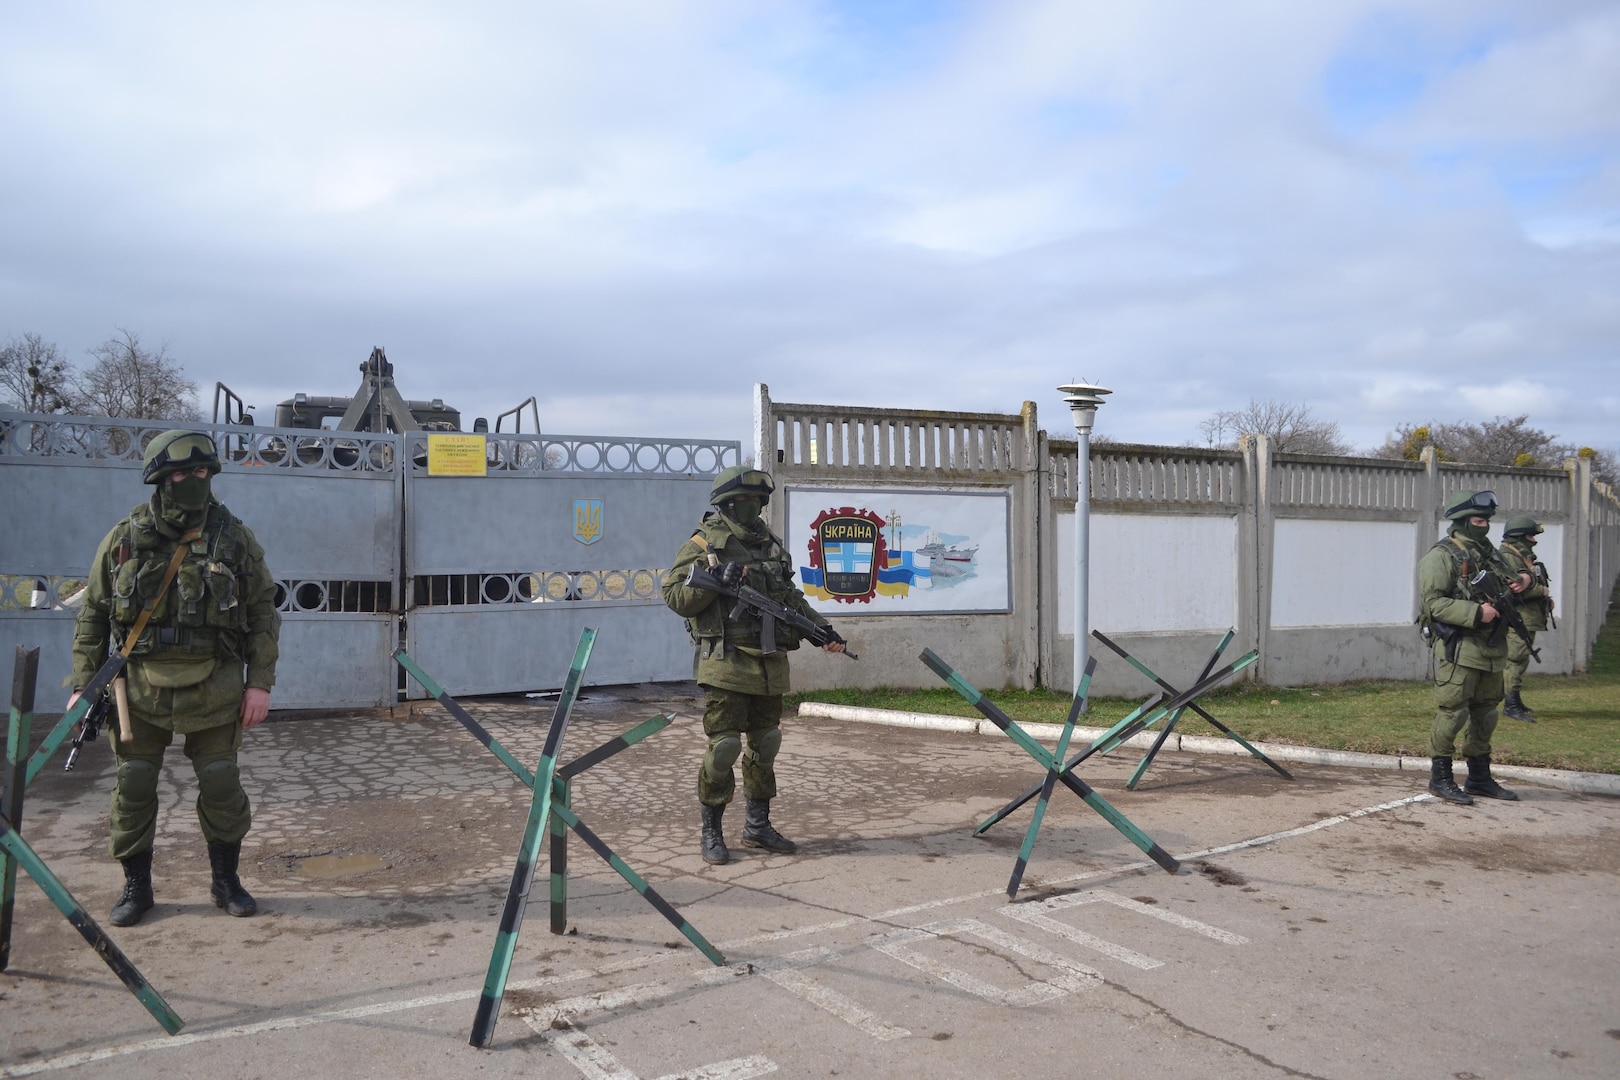 Known as the “little green men,” Russian soldiers stand watch over Perevalne military base in Crimea. (March 2014)